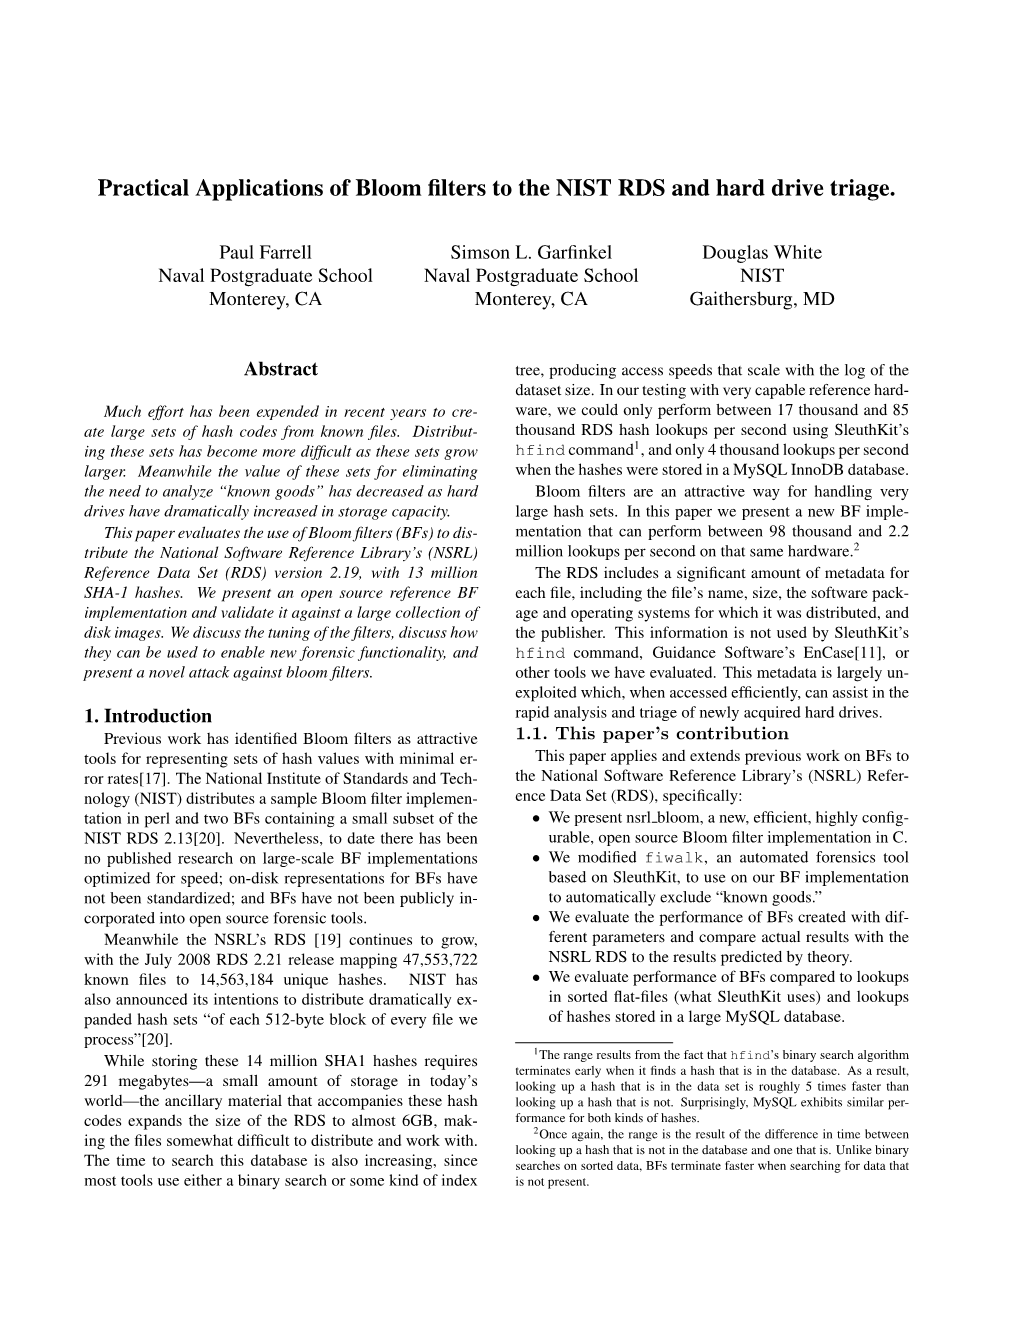 Practical Applications of Bloom Filters to the NIST RDS and Hard Drive